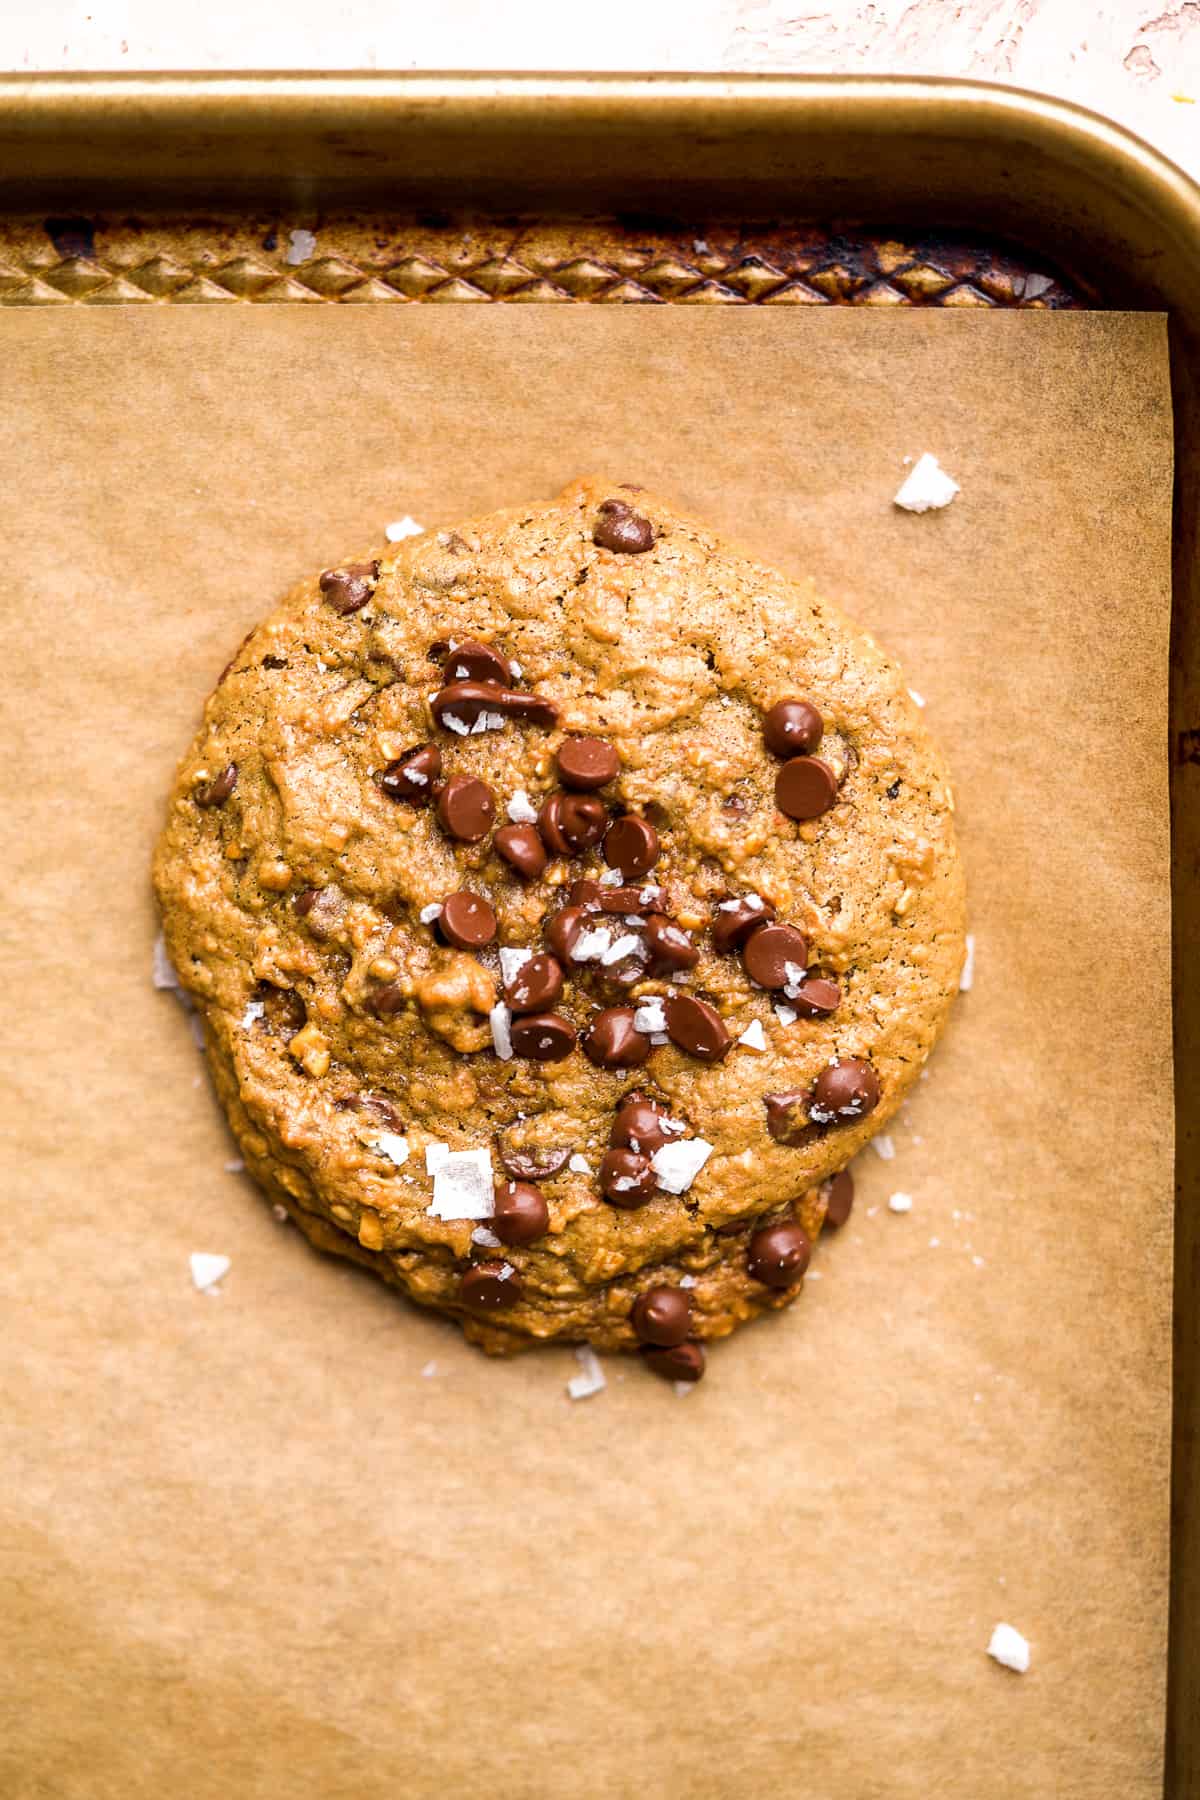 Round cookie with chocolate chips and sea salt on top in a baking pan,